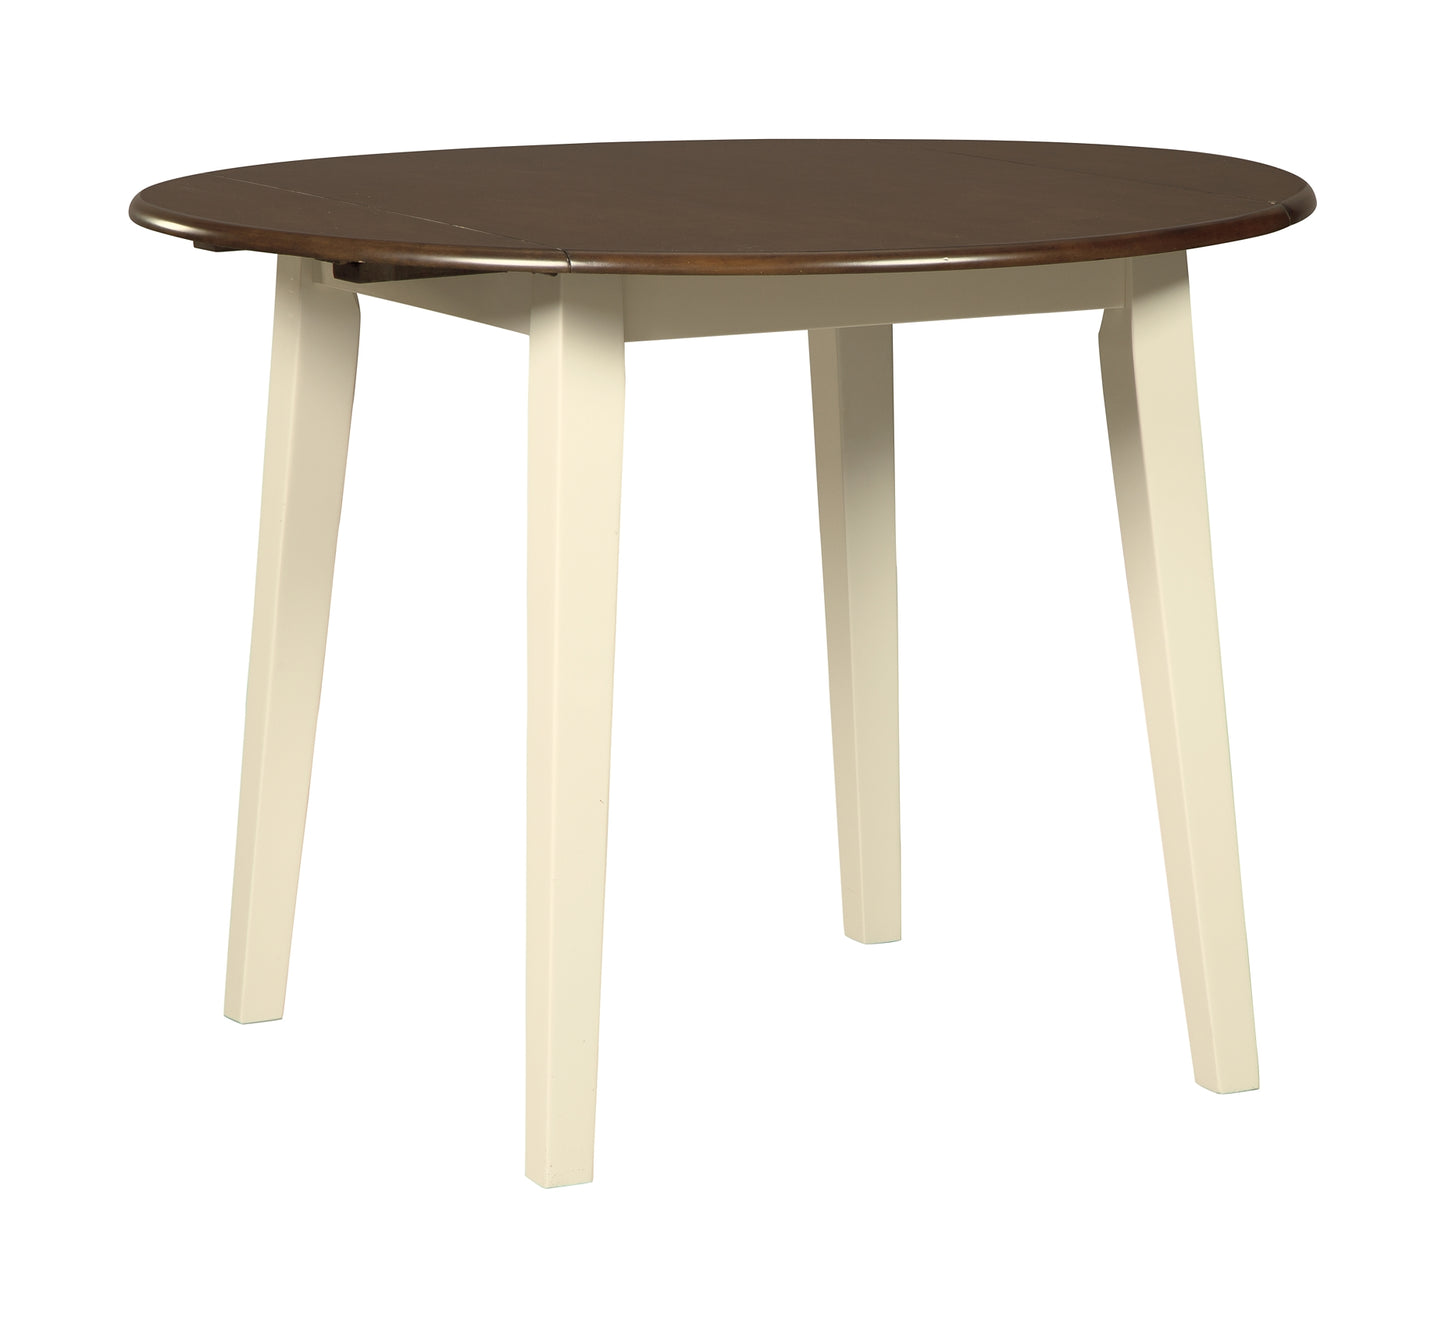 Ashley Express - Woodanville Round DRM Drop Leaf Table